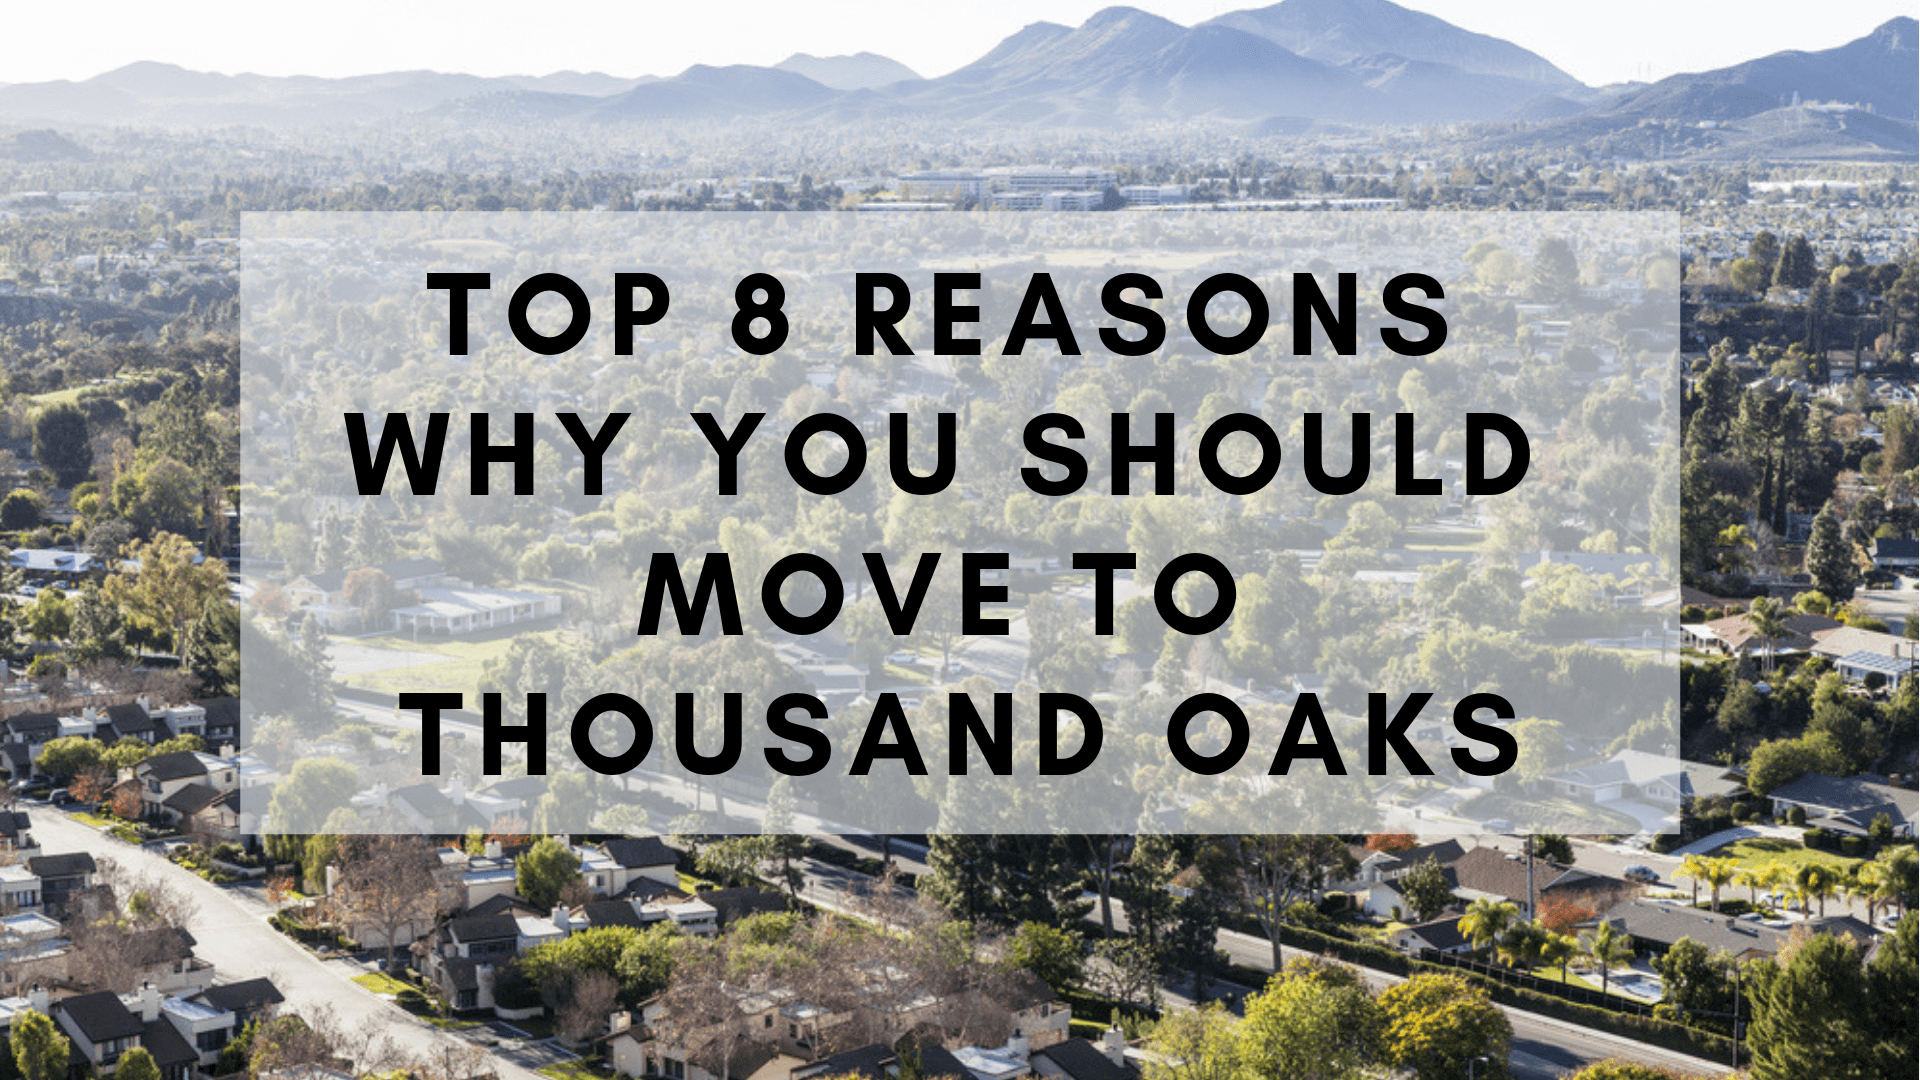 Top 8 Reasons Why You Should Move to Thousand Oaks, CA